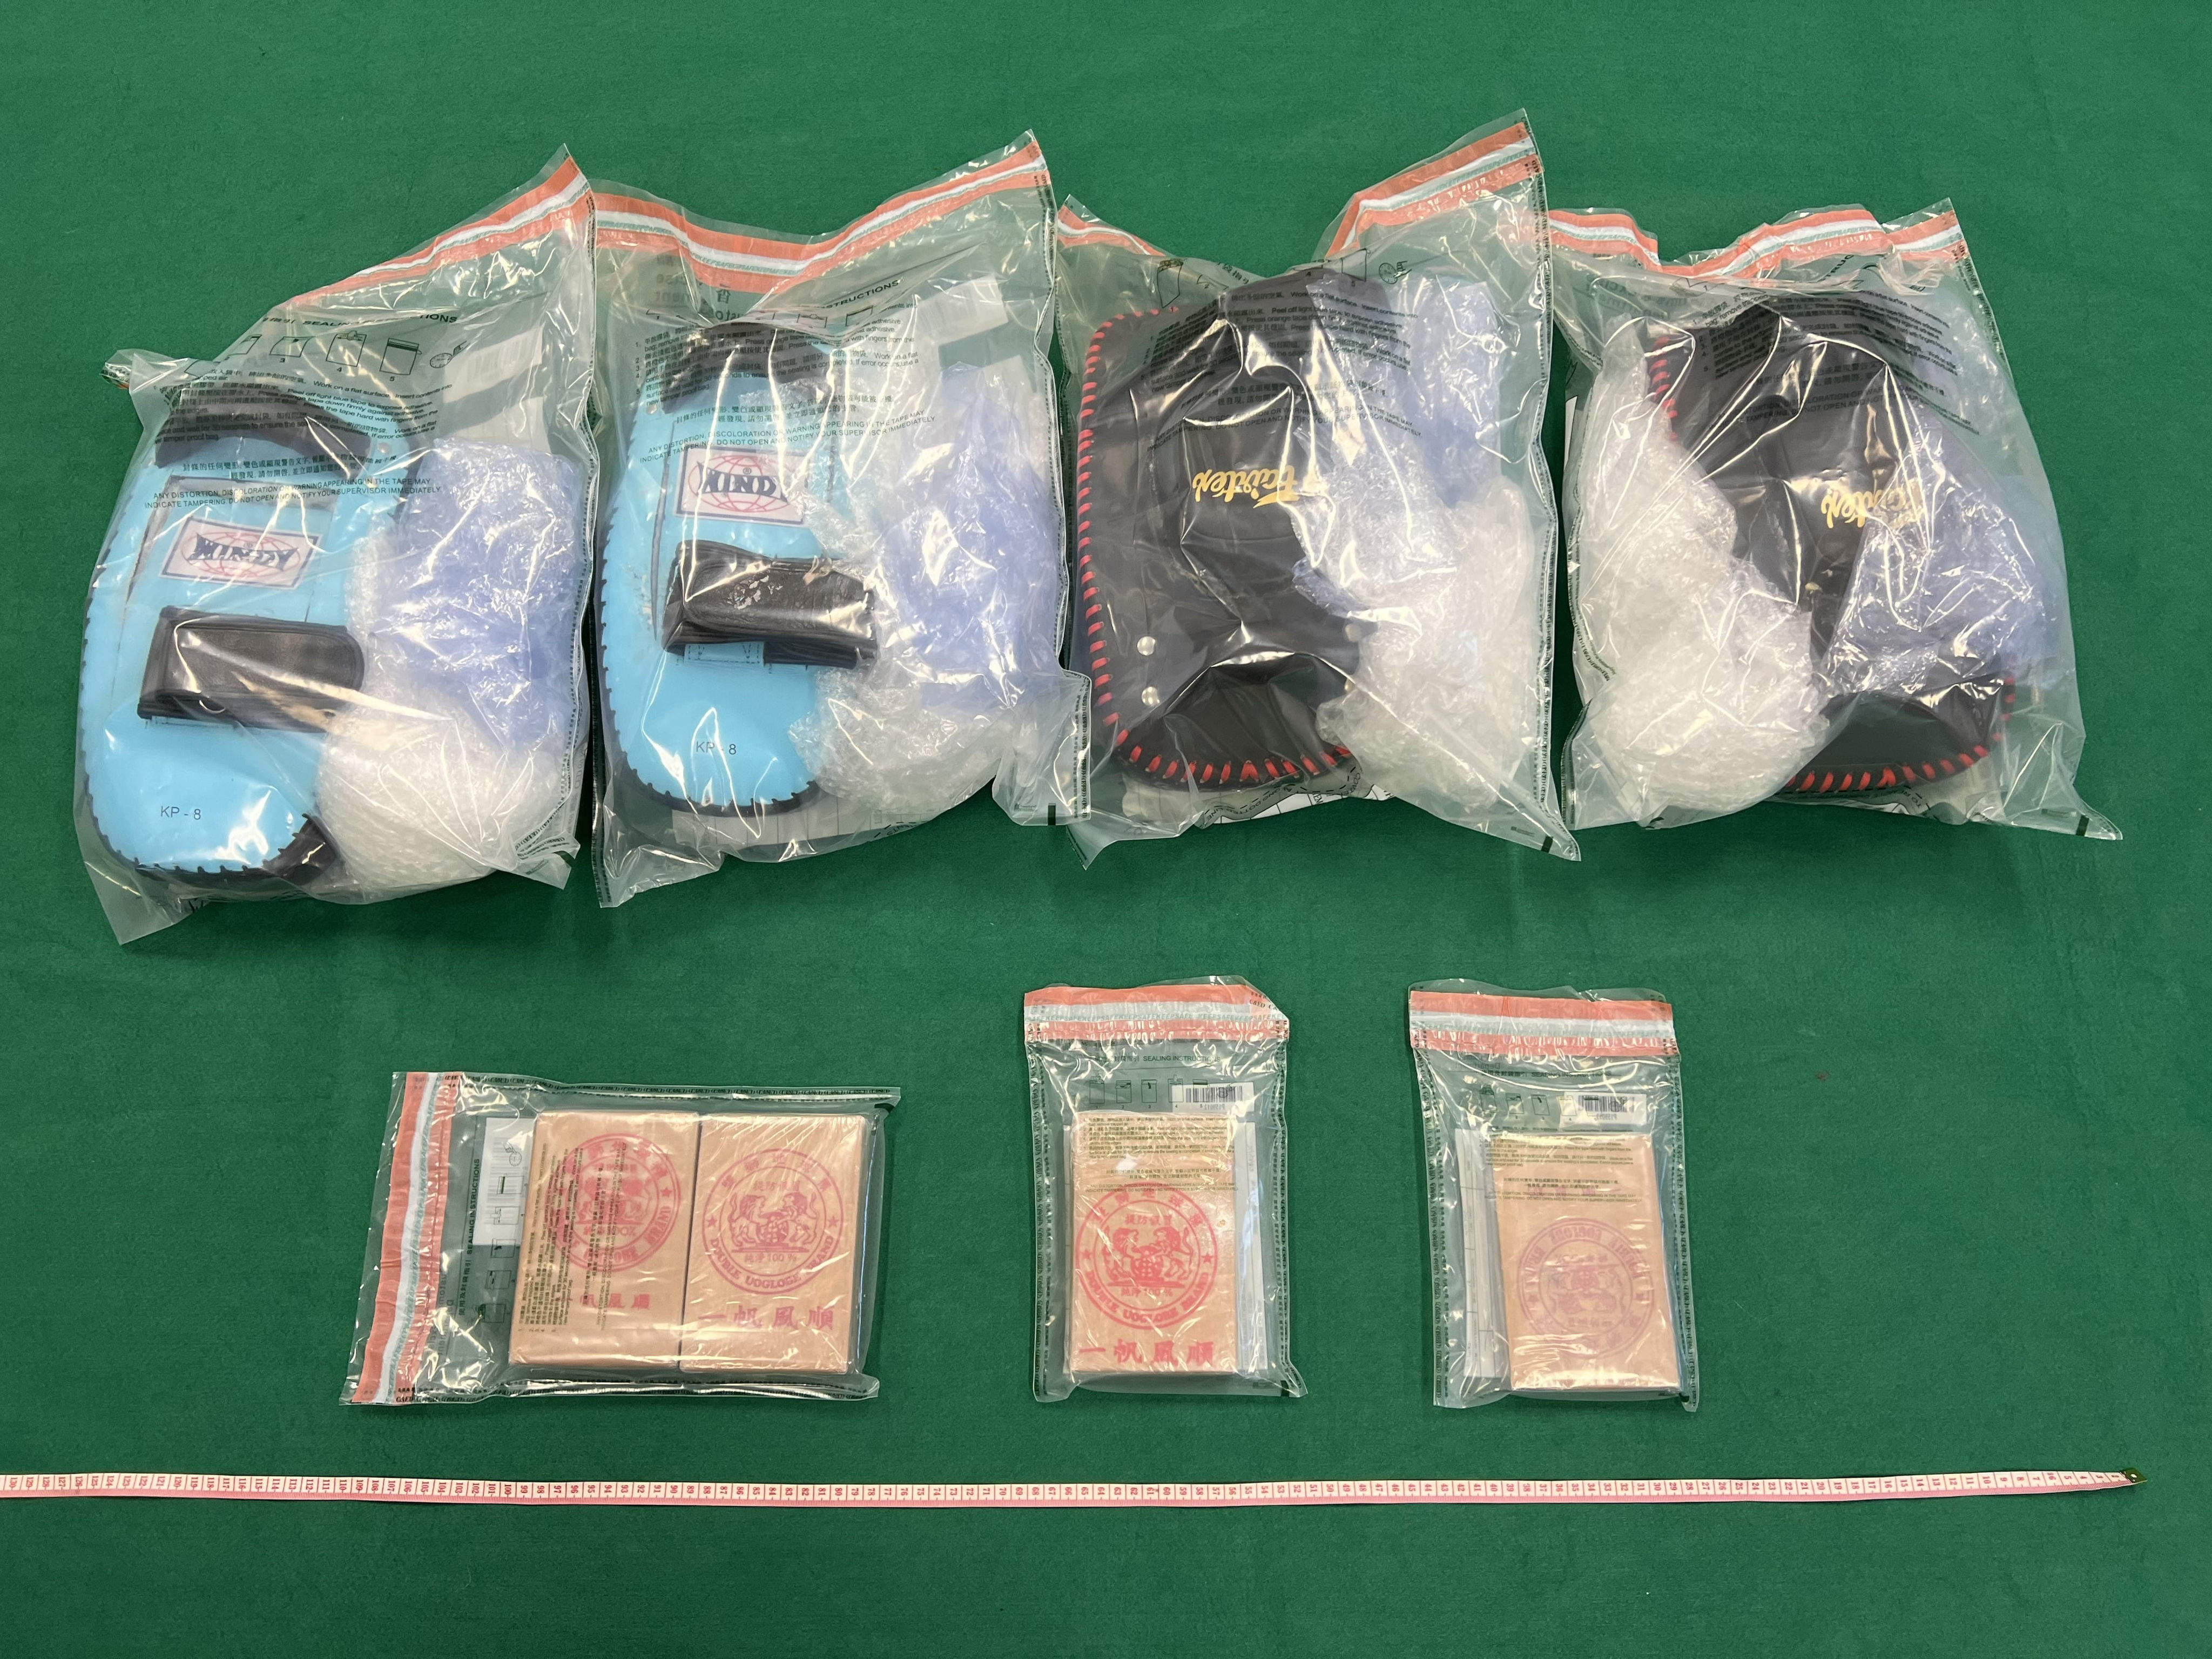 Customs intercepted 1.5kg of suspected heroin, leading to the arrest of three teenage boys and the seizure of 3kg of methamphetamine. Photo: Handout